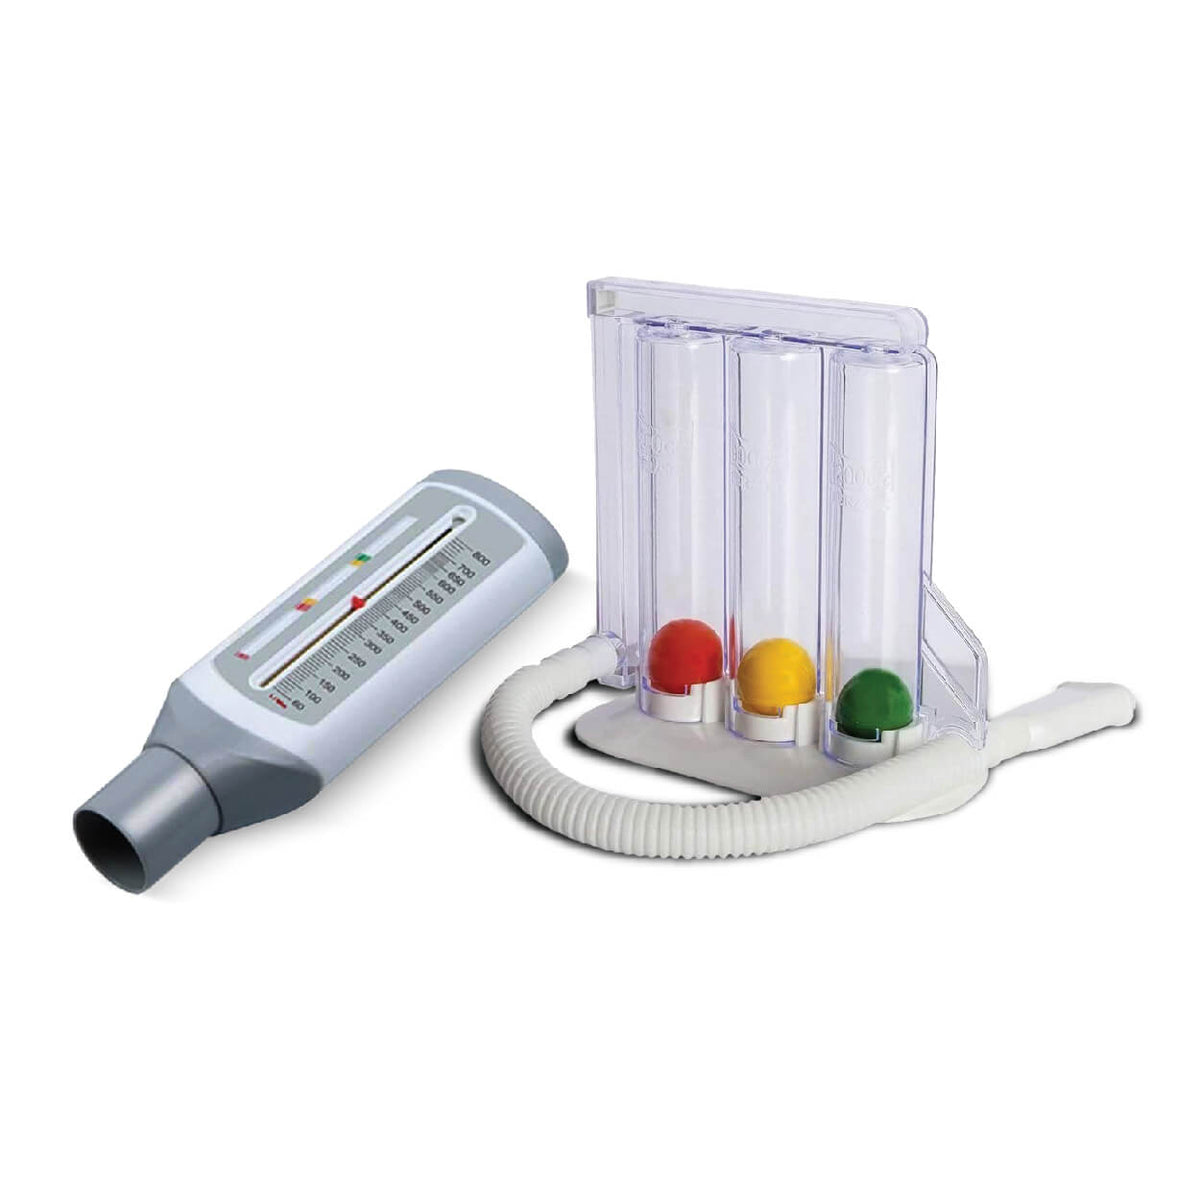 Lung Exerciser with Peak Flow Meter